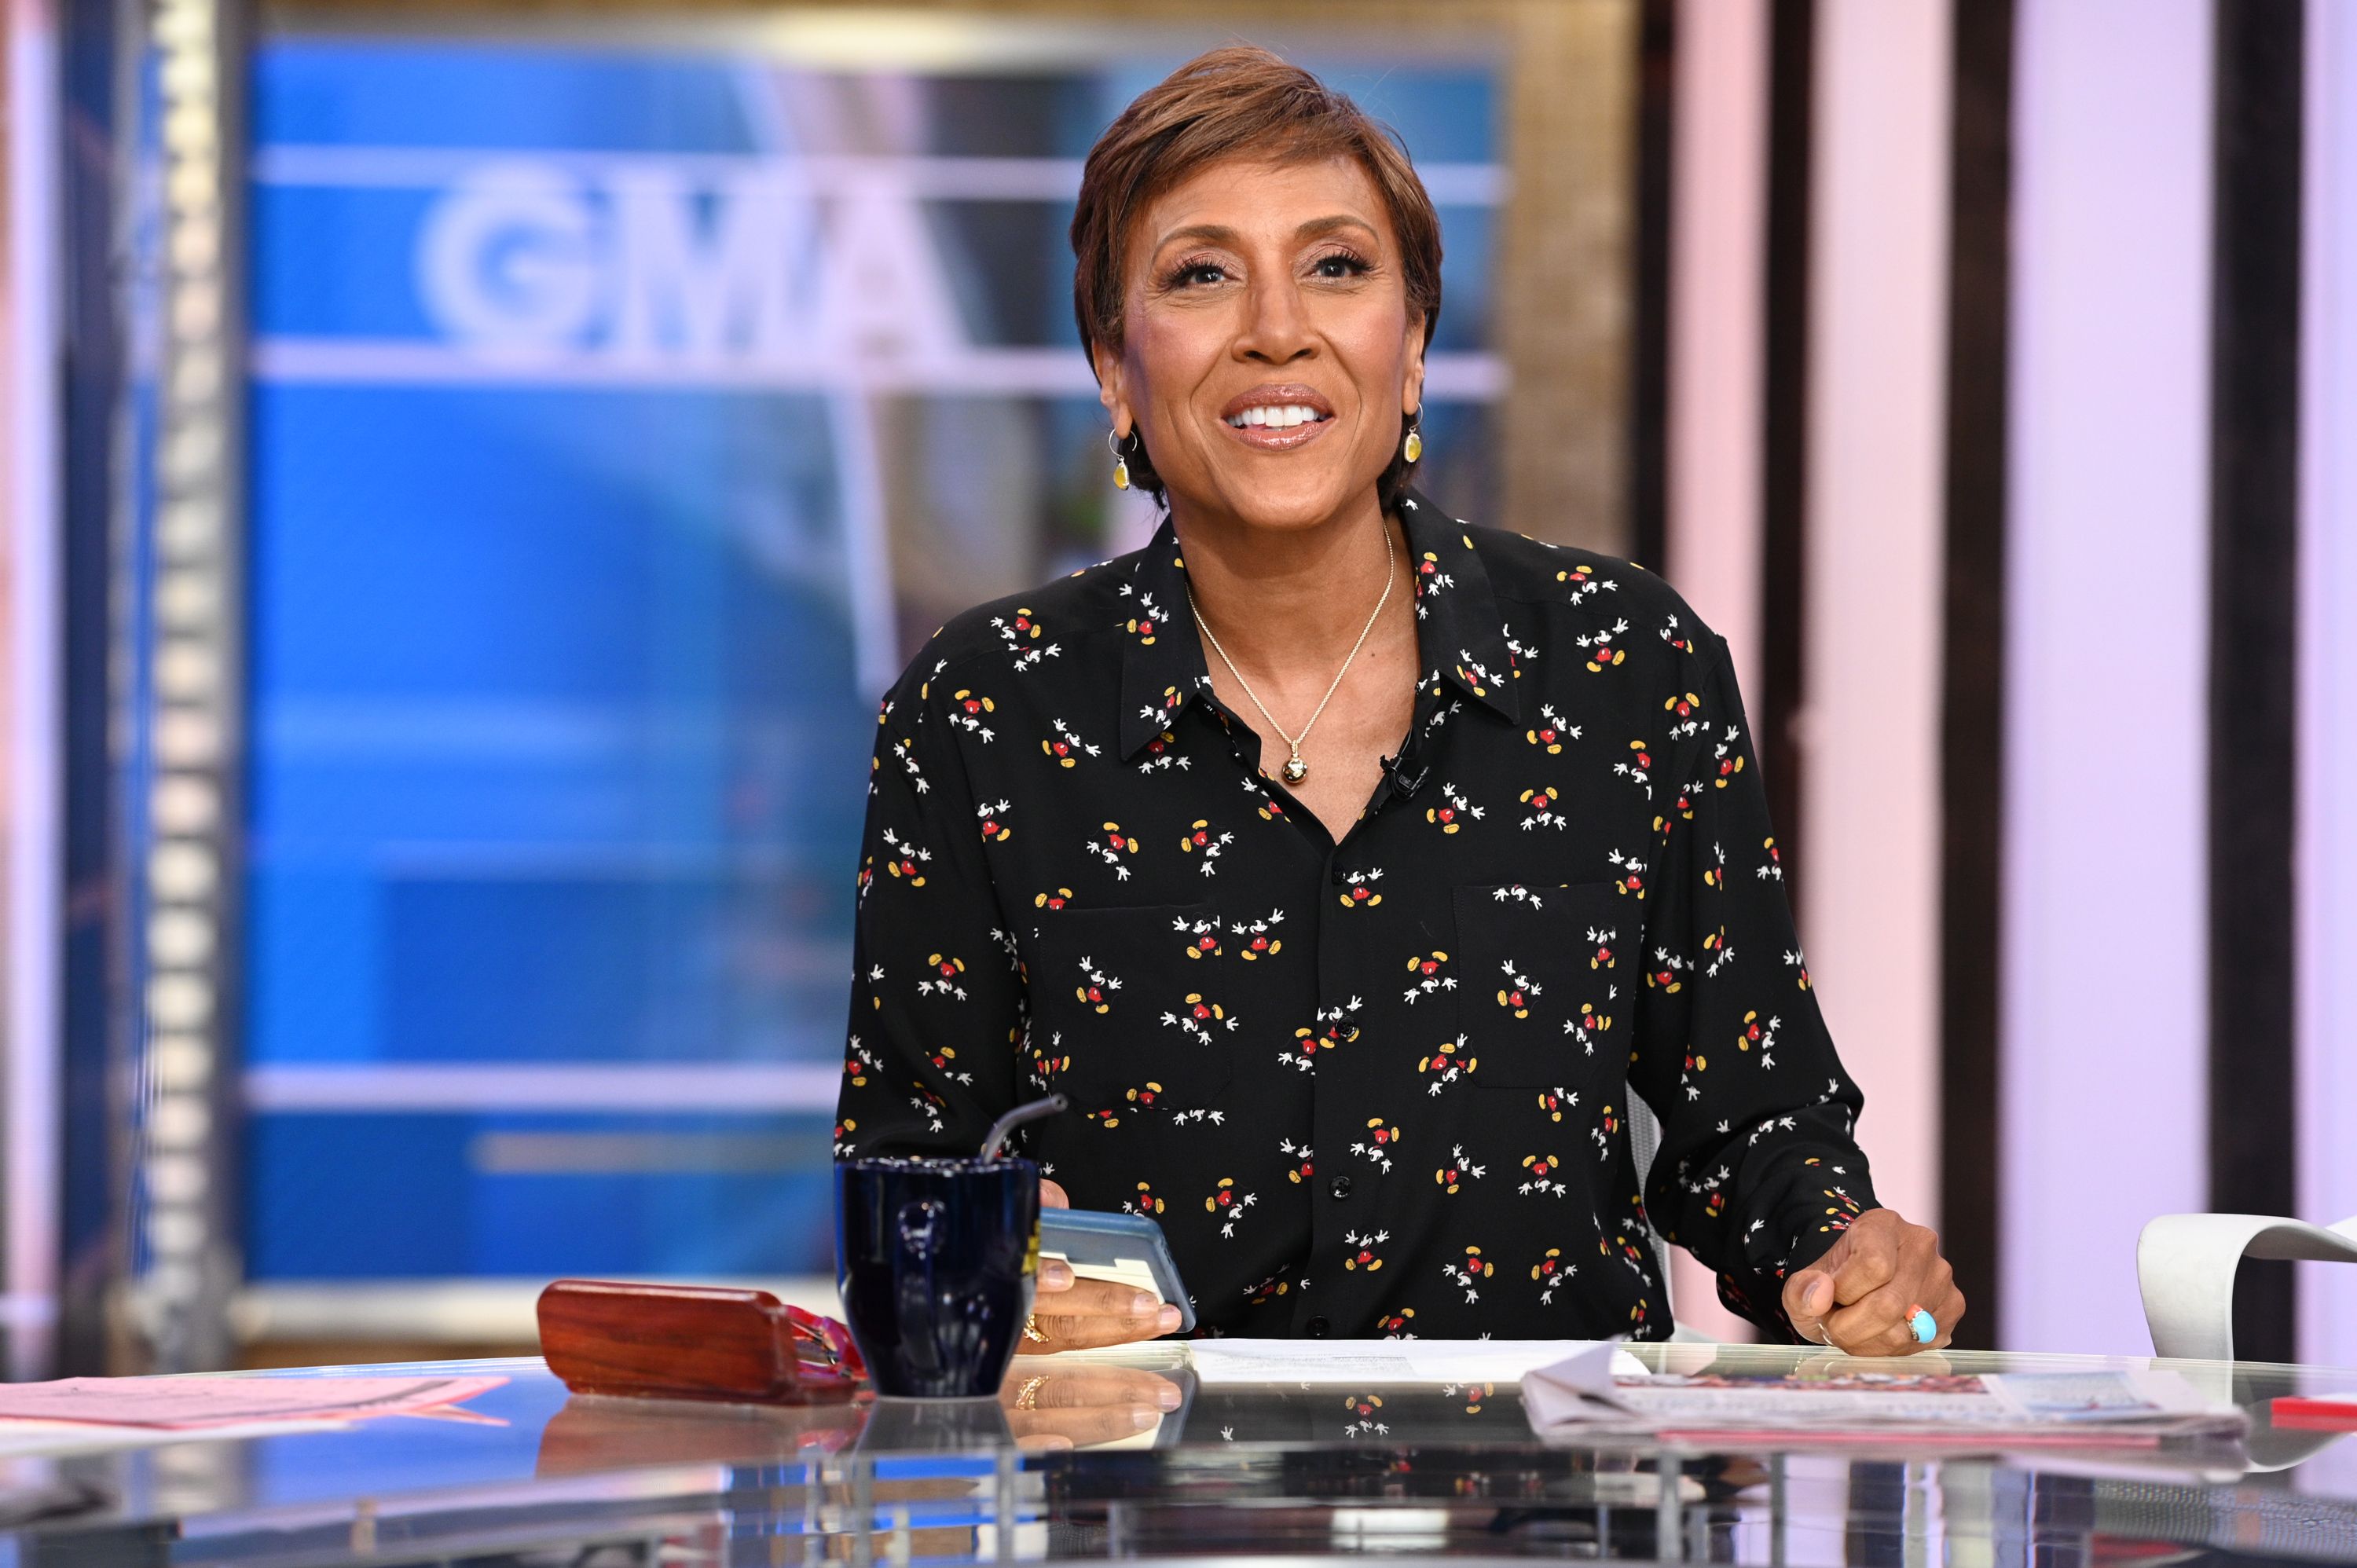 Robin Roberts on the set of ABC's "Good Morning America" | Source: Getty Images